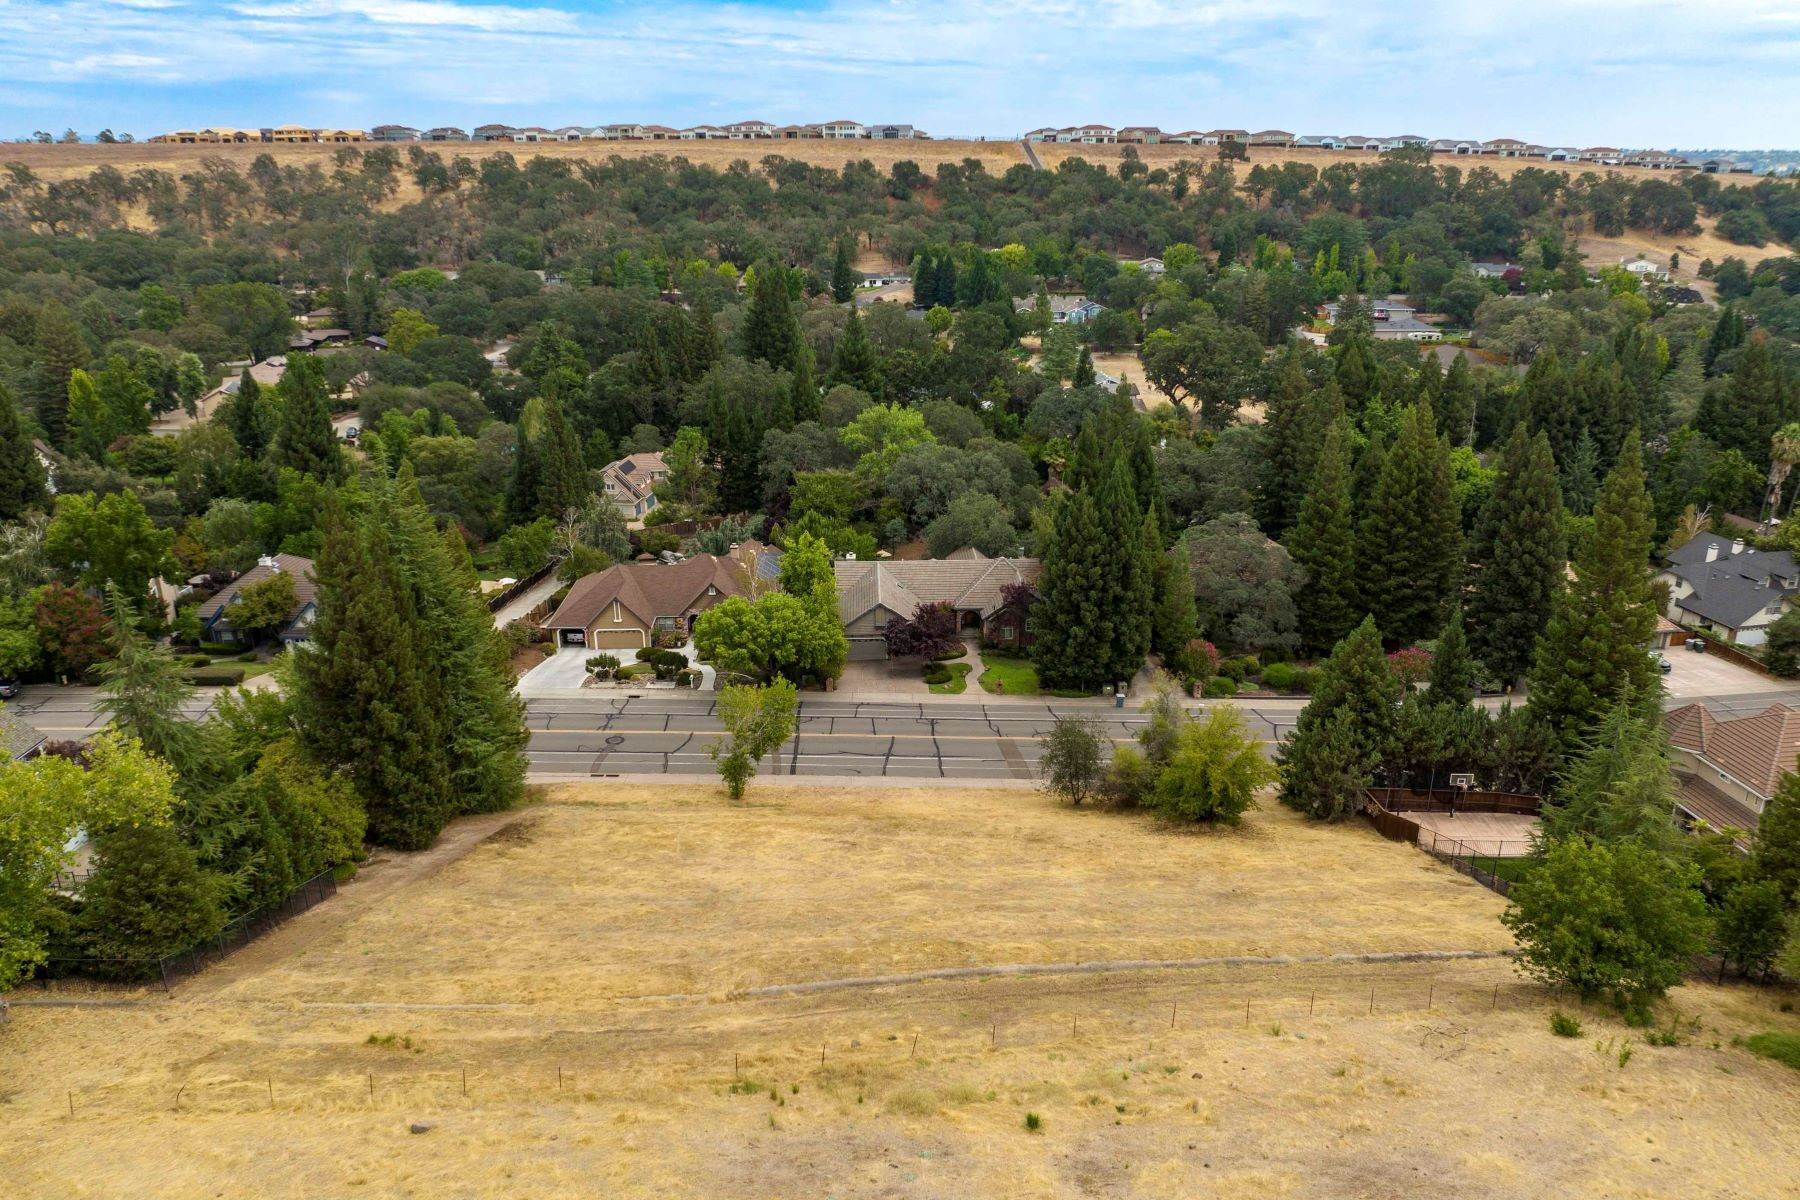 Other Residential Homes for Active at 3962 Rawhide Road, Rocklin, CA 95677 3962 Rawhide Road Rocklin, California 95677 United States